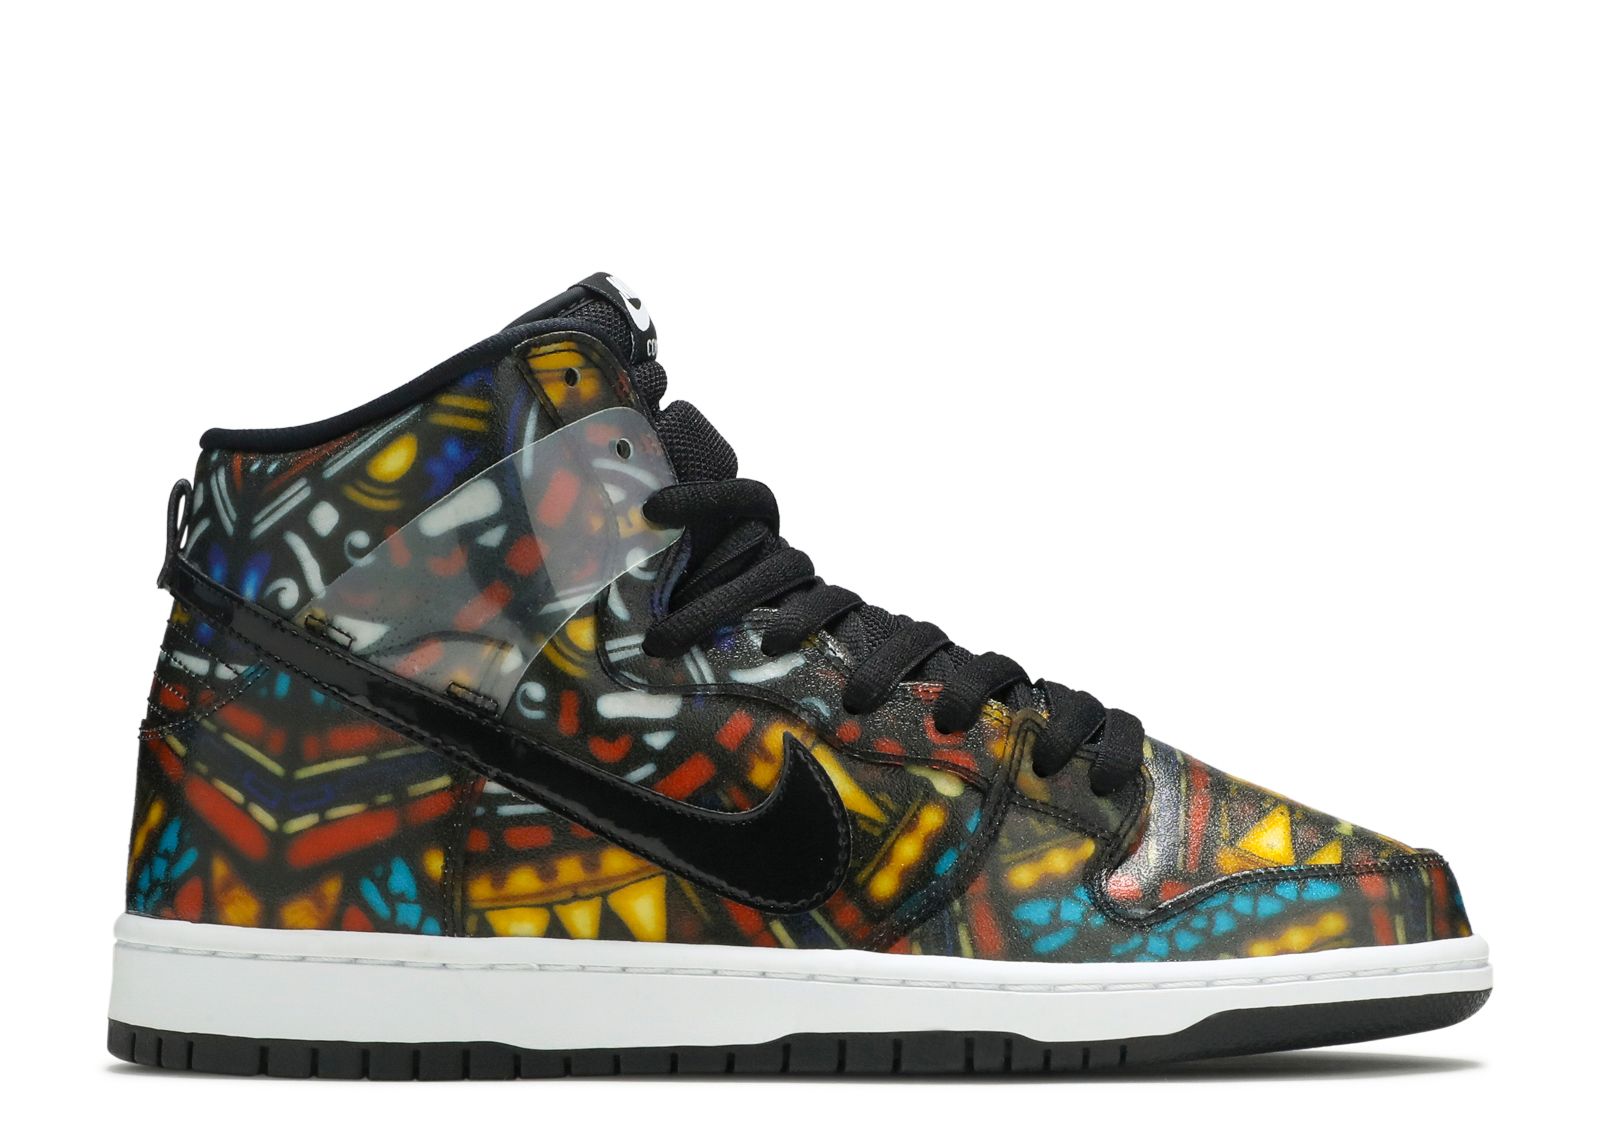 Кроссовки Nike Concepts X Sb Dunk High 'Stained Glass' Special Box, разноцветный